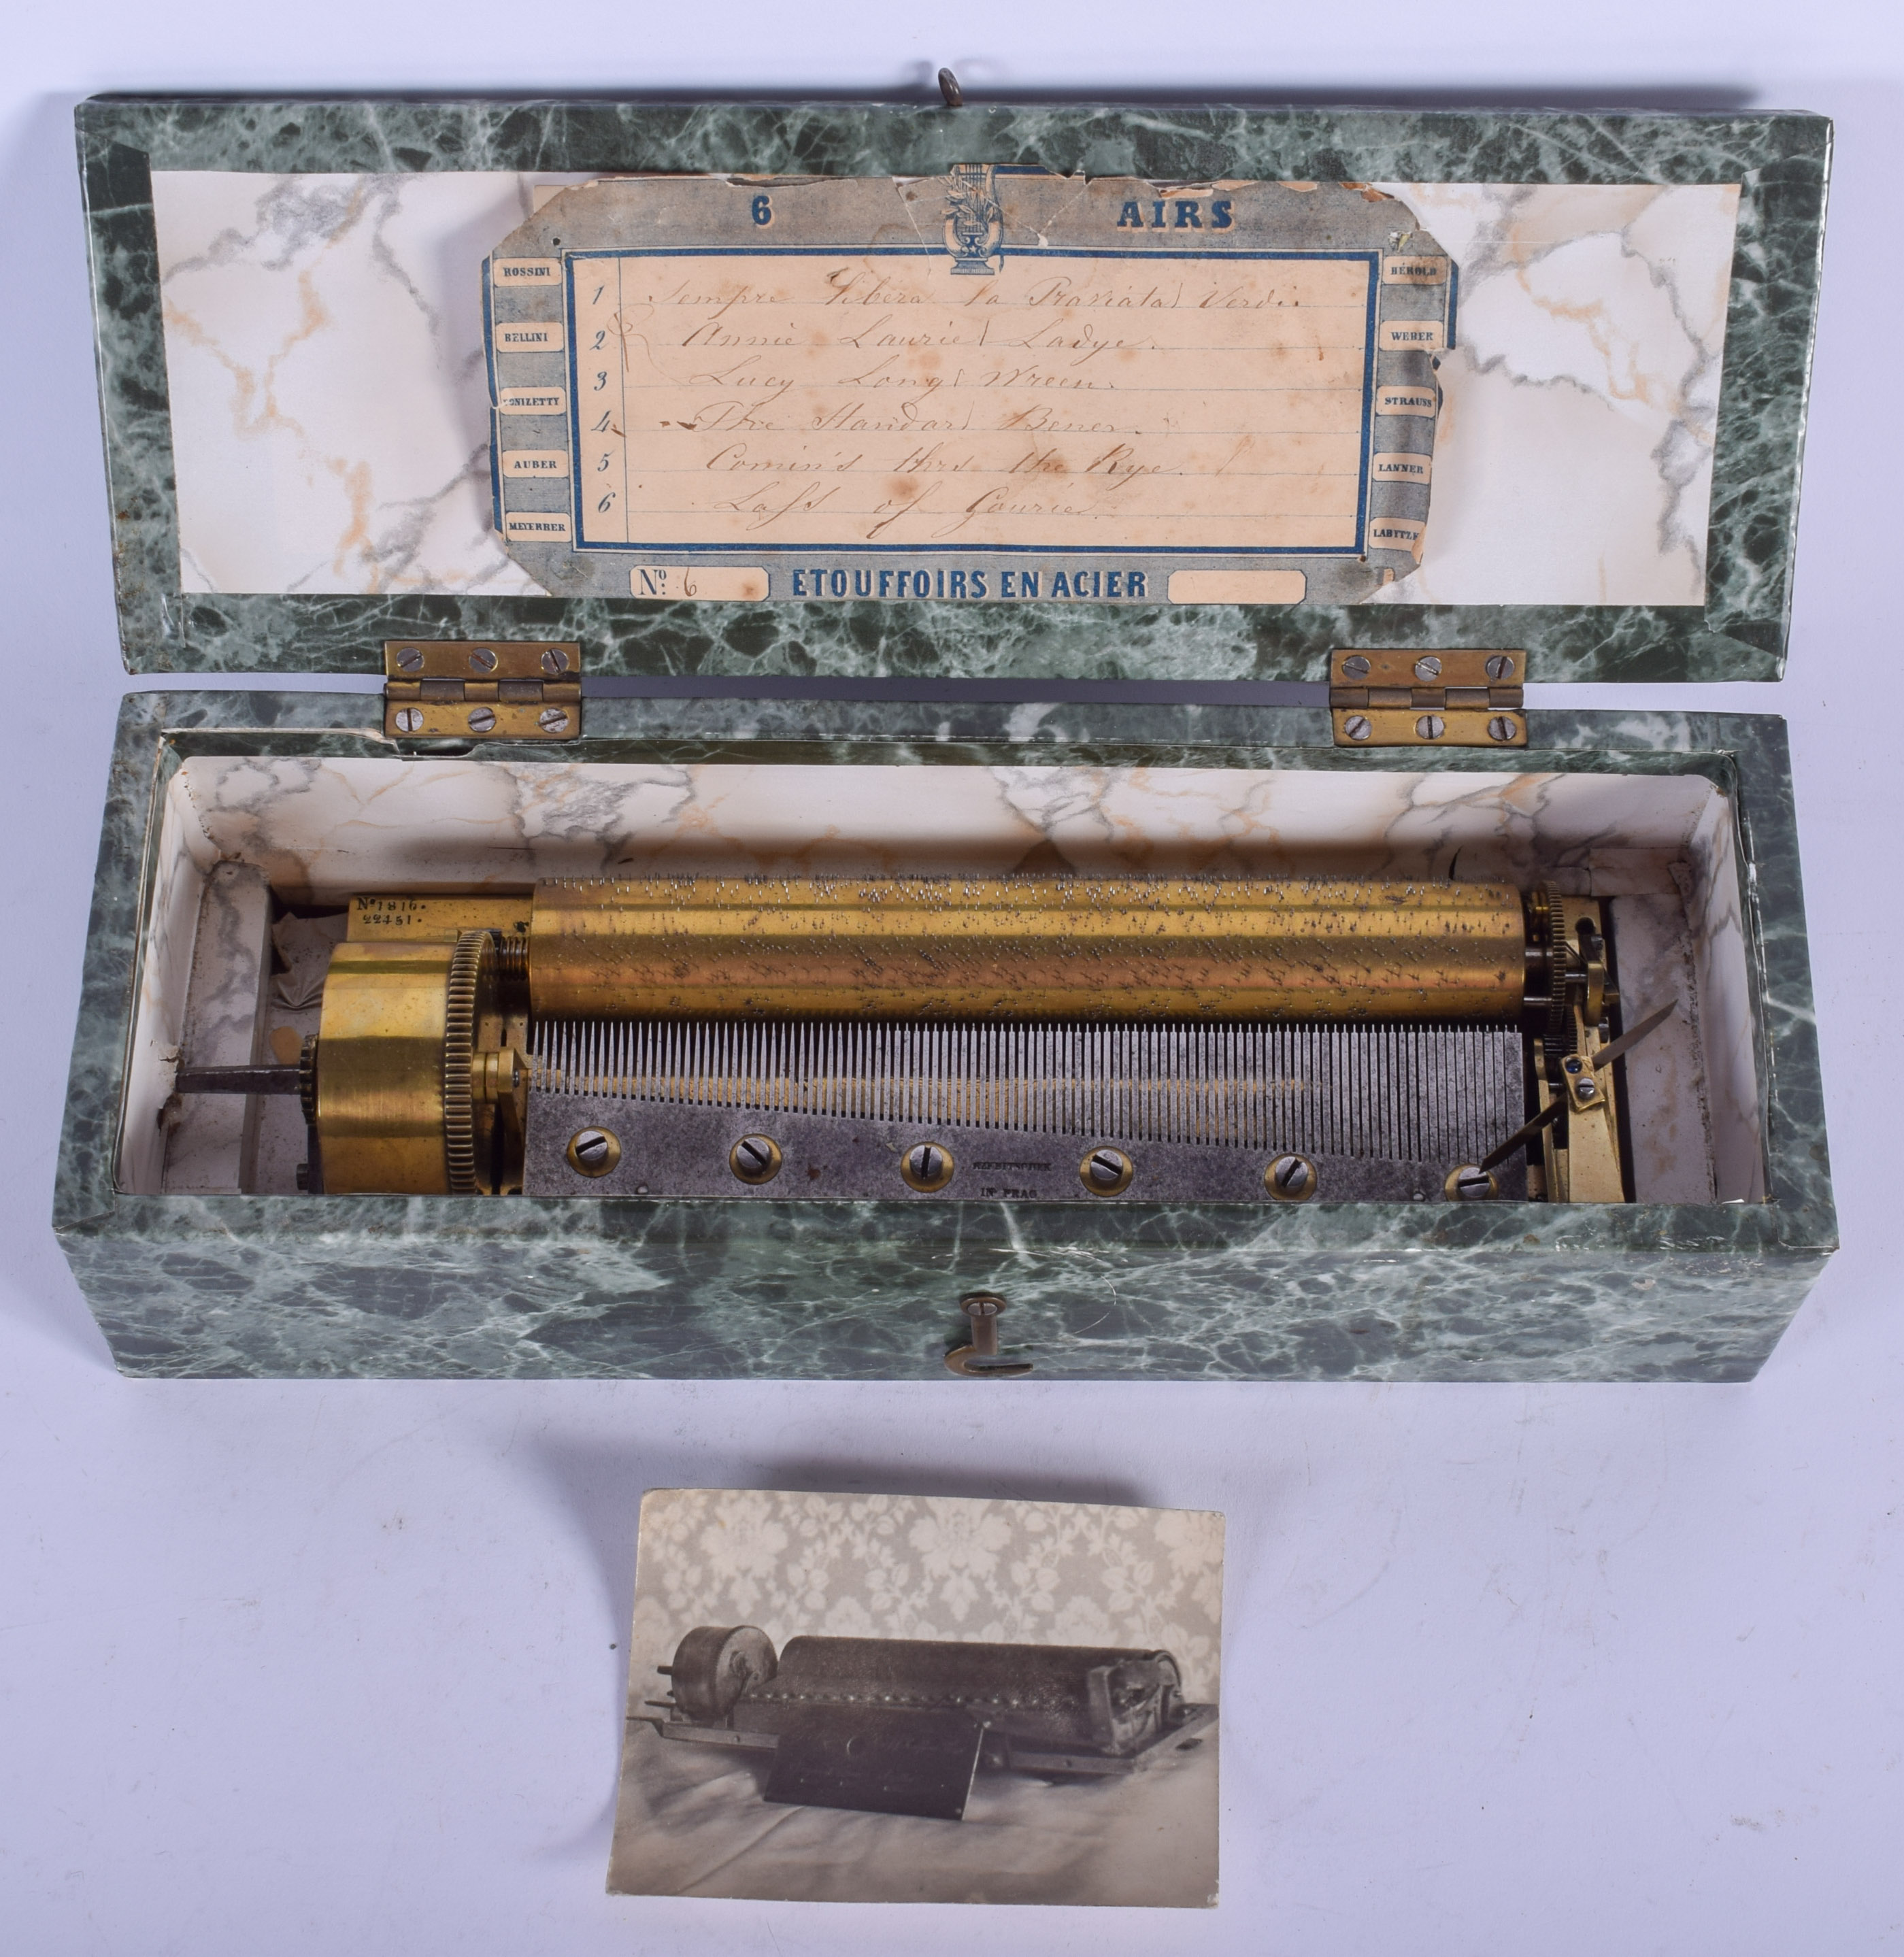 A RARE 19TH CENTURY AUSTRO HUNGARIAN TABLETOP CYLINDER MUSIC BOX by F Rzebitschek, Fabrik in Prag. O - Image 3 of 7